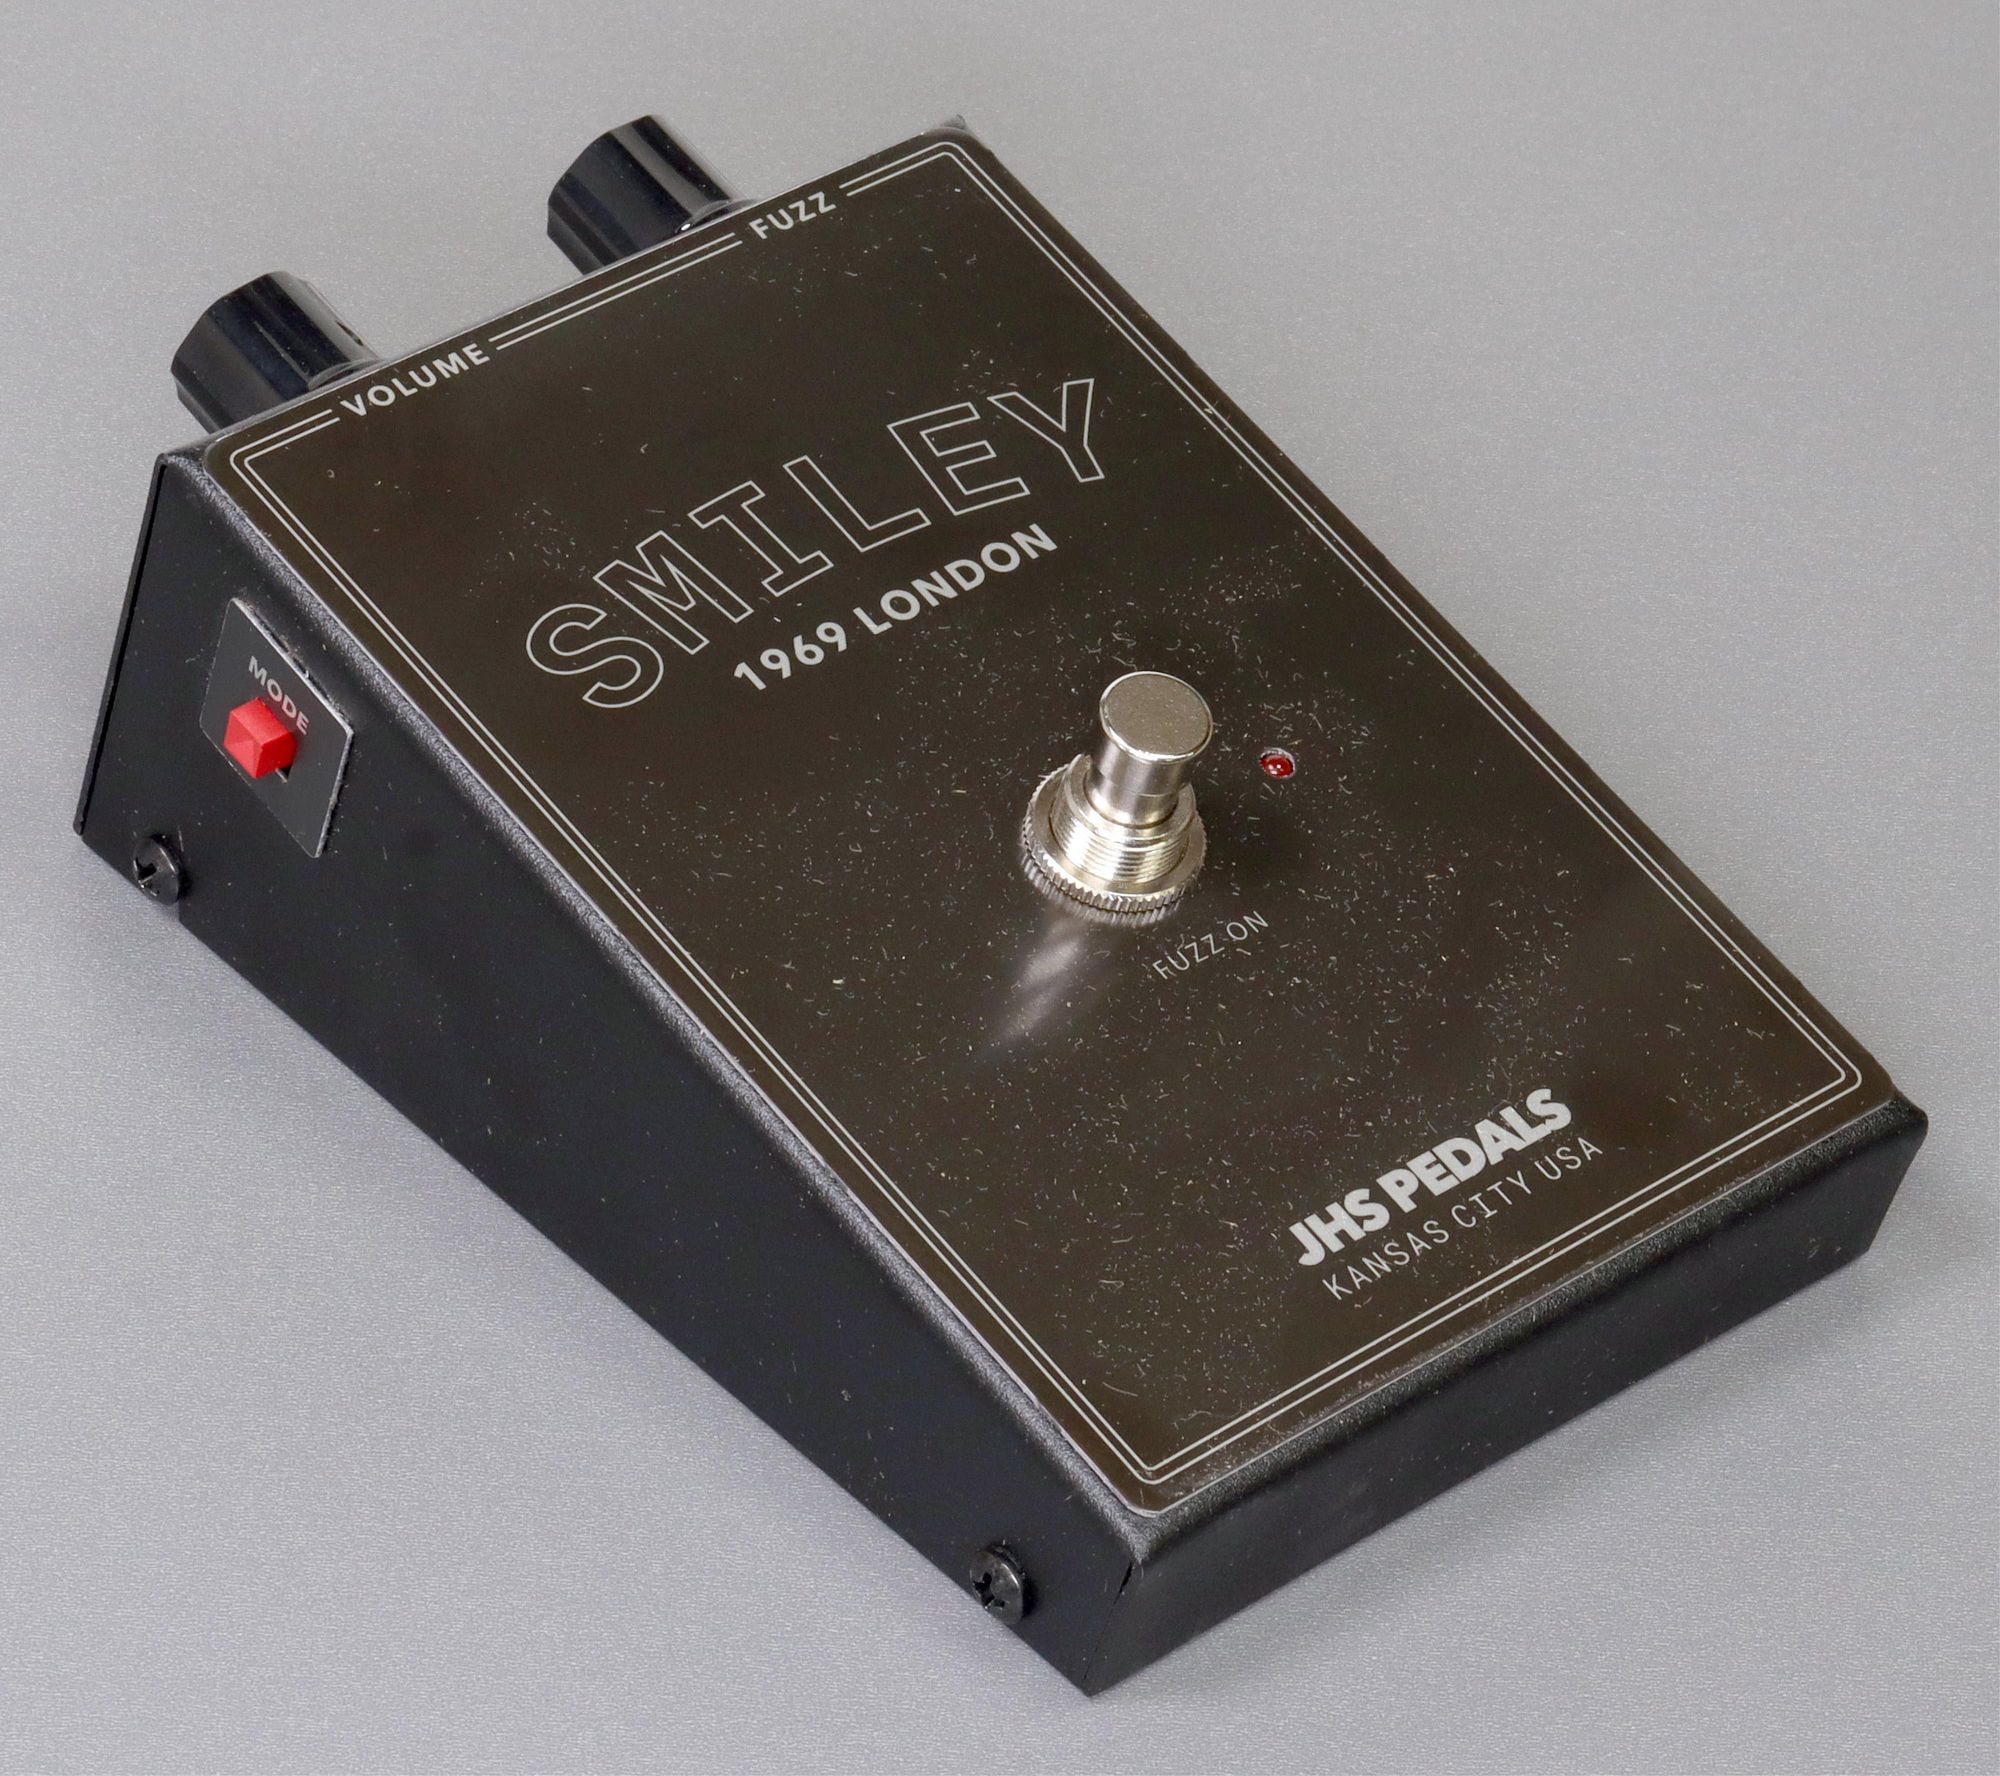 JHS SMILEY FUZZ EFFECTS PEDAL for sale at auction on 19th January